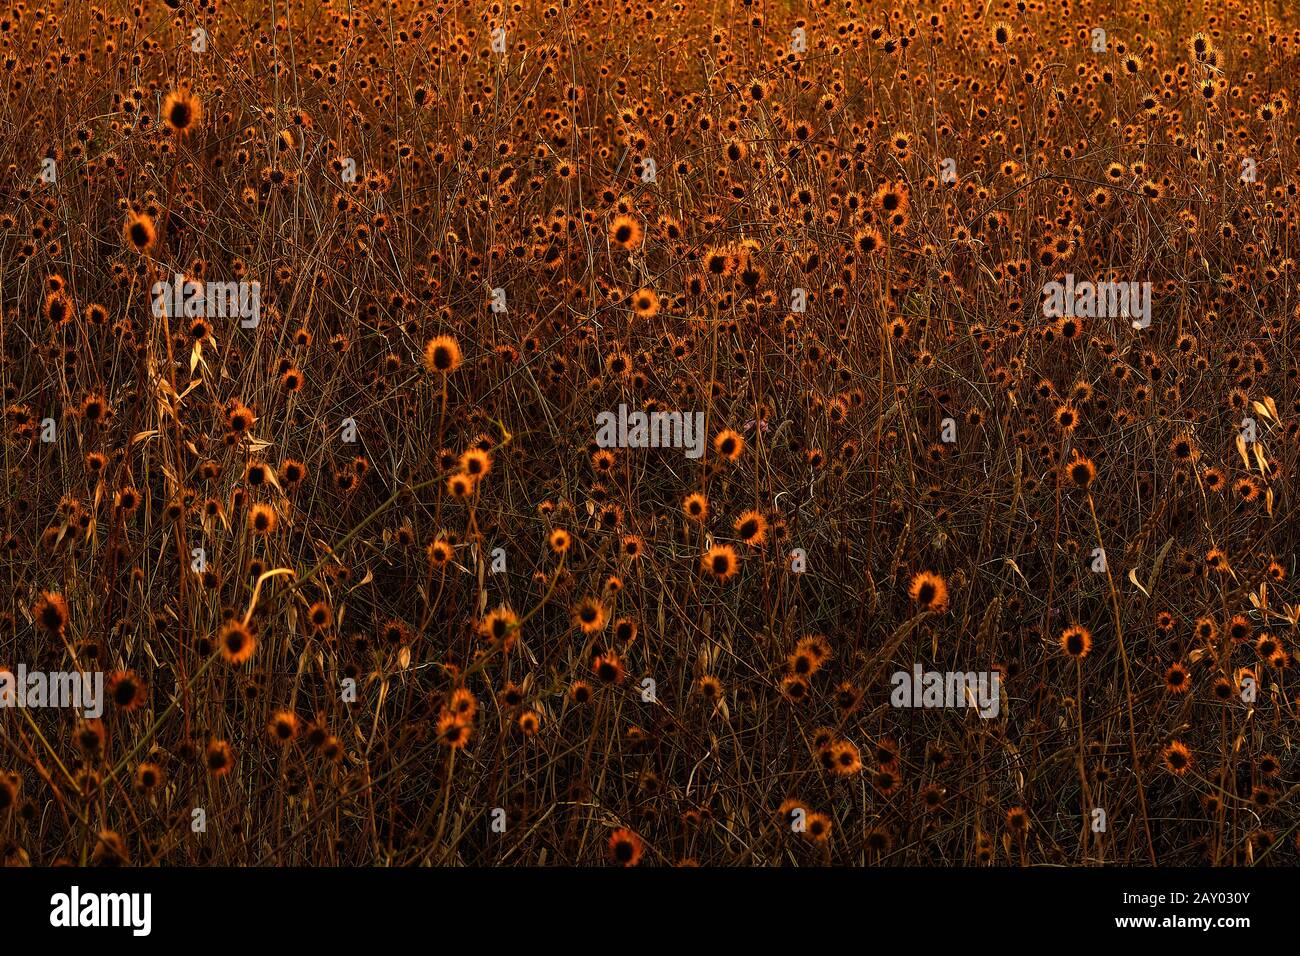 Background of field of round flowers illuminated by the dawn of a golden light, Collserola, Catalonia Stock Photo